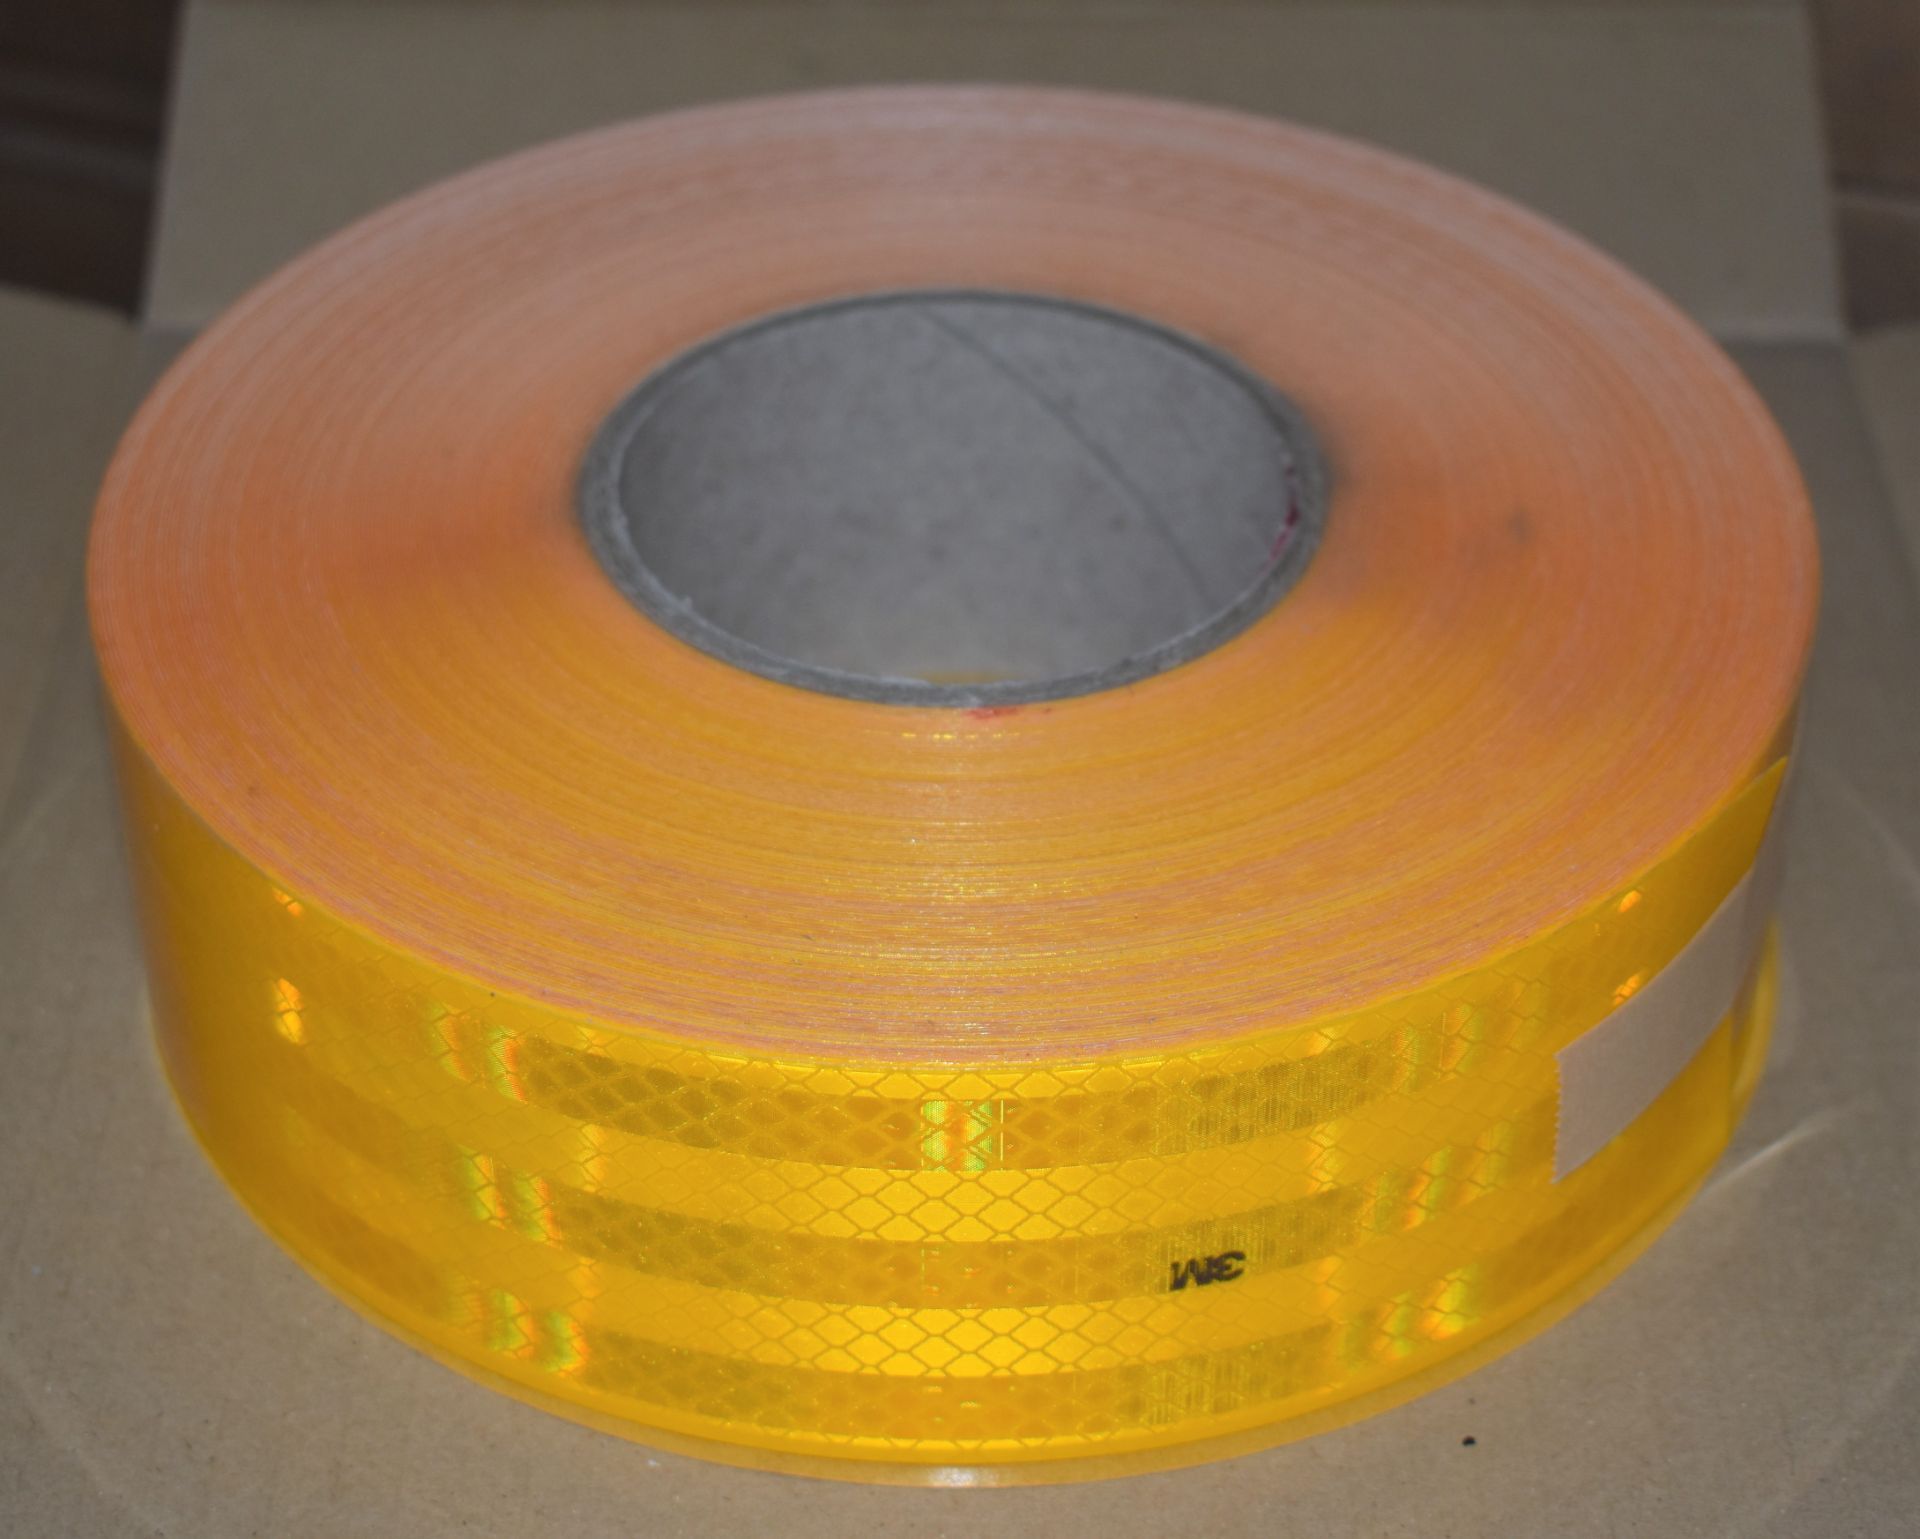 1 x Roll of 3M Conspicuity Tape Reflective Sheeting - Size 55mm x 50m - Diamond Grade - Colour - Image 3 of 4